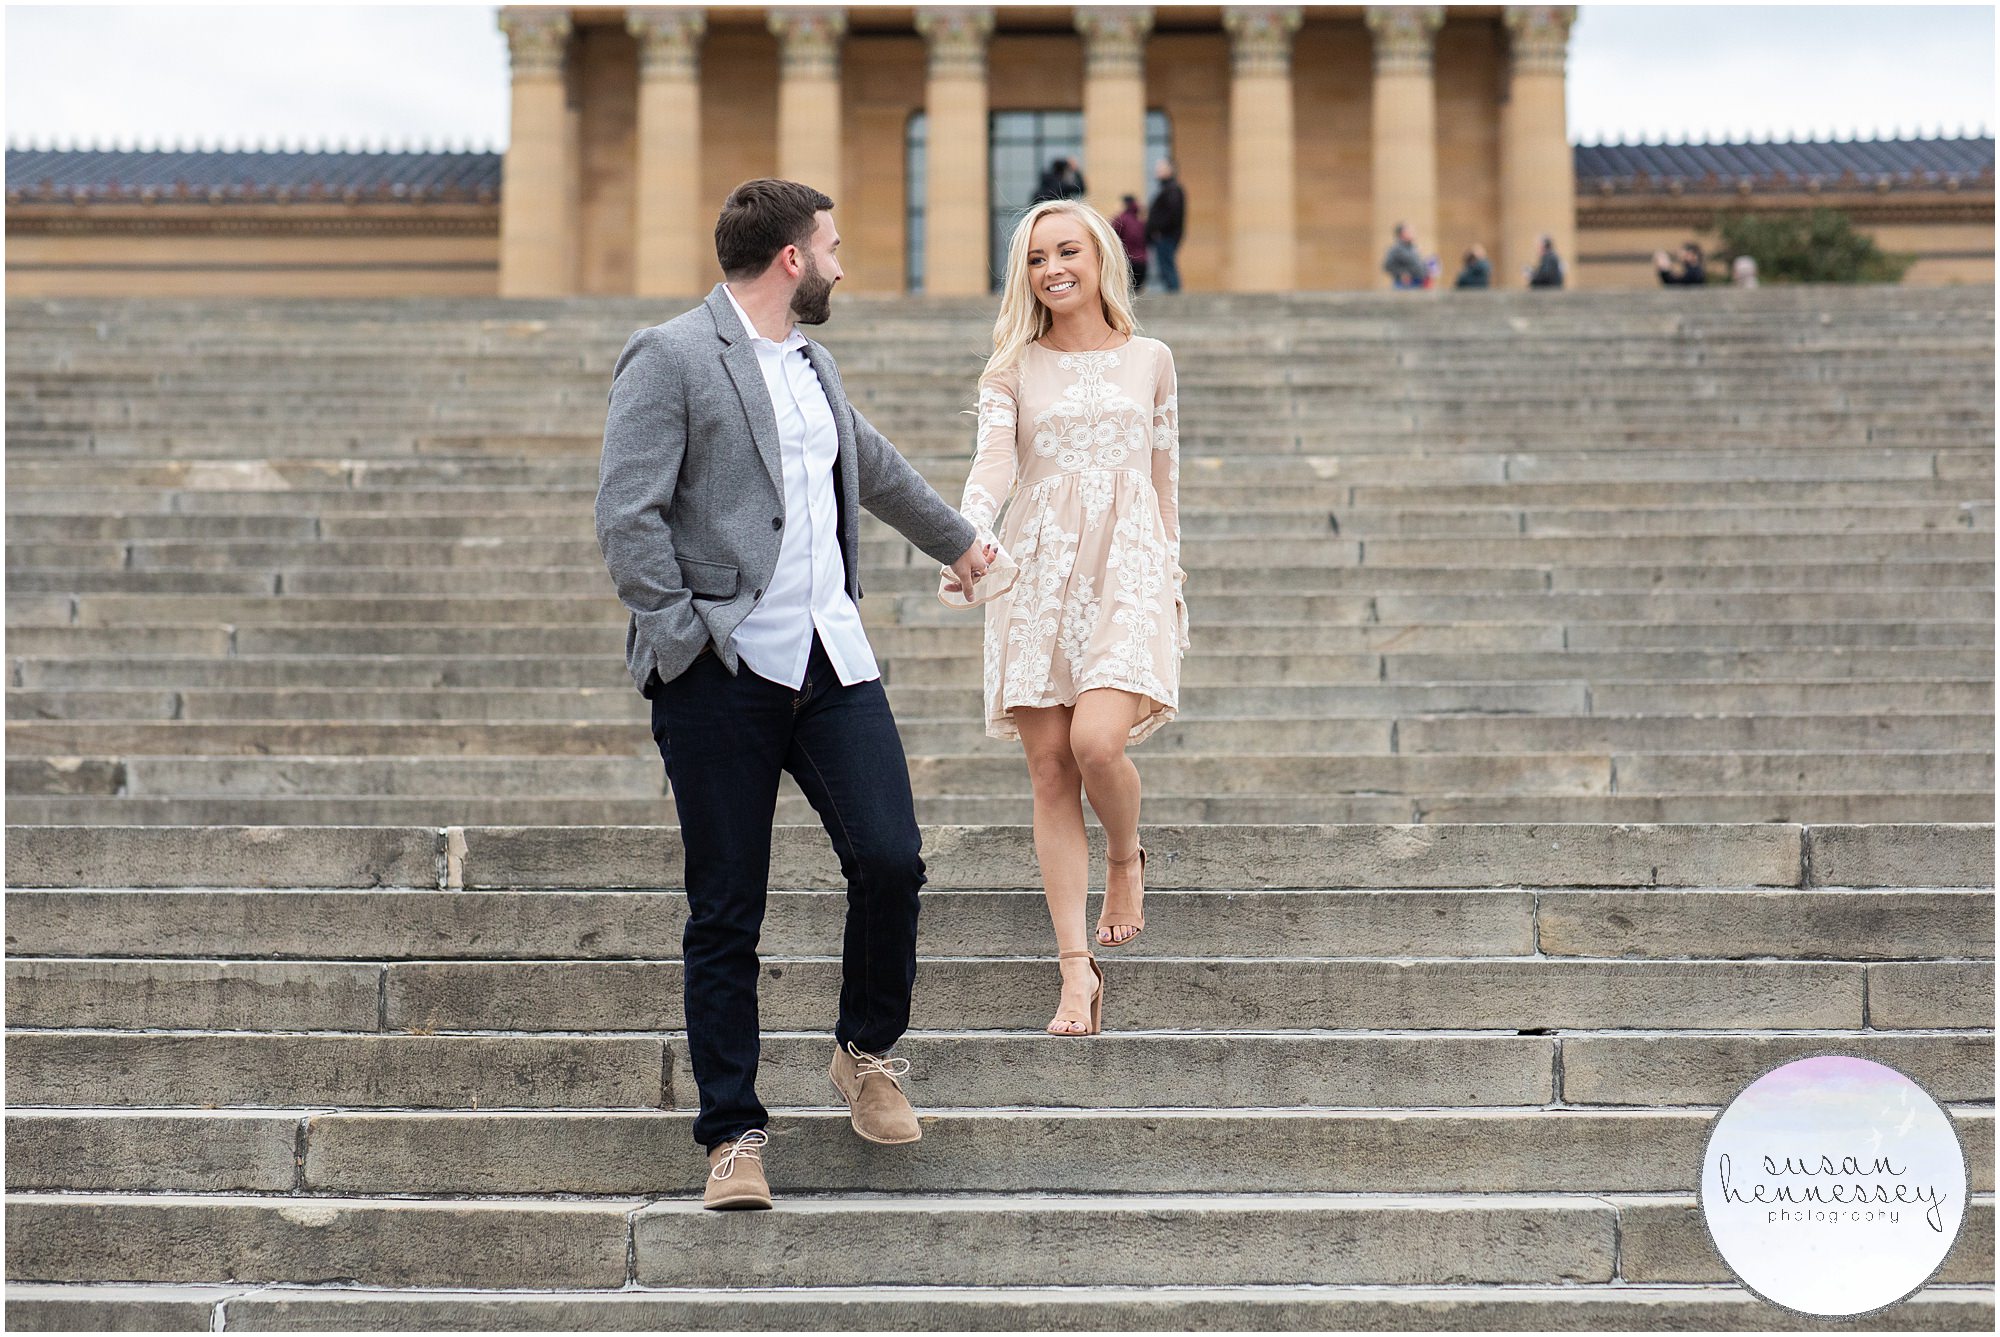 An art museum engagement session in Philly